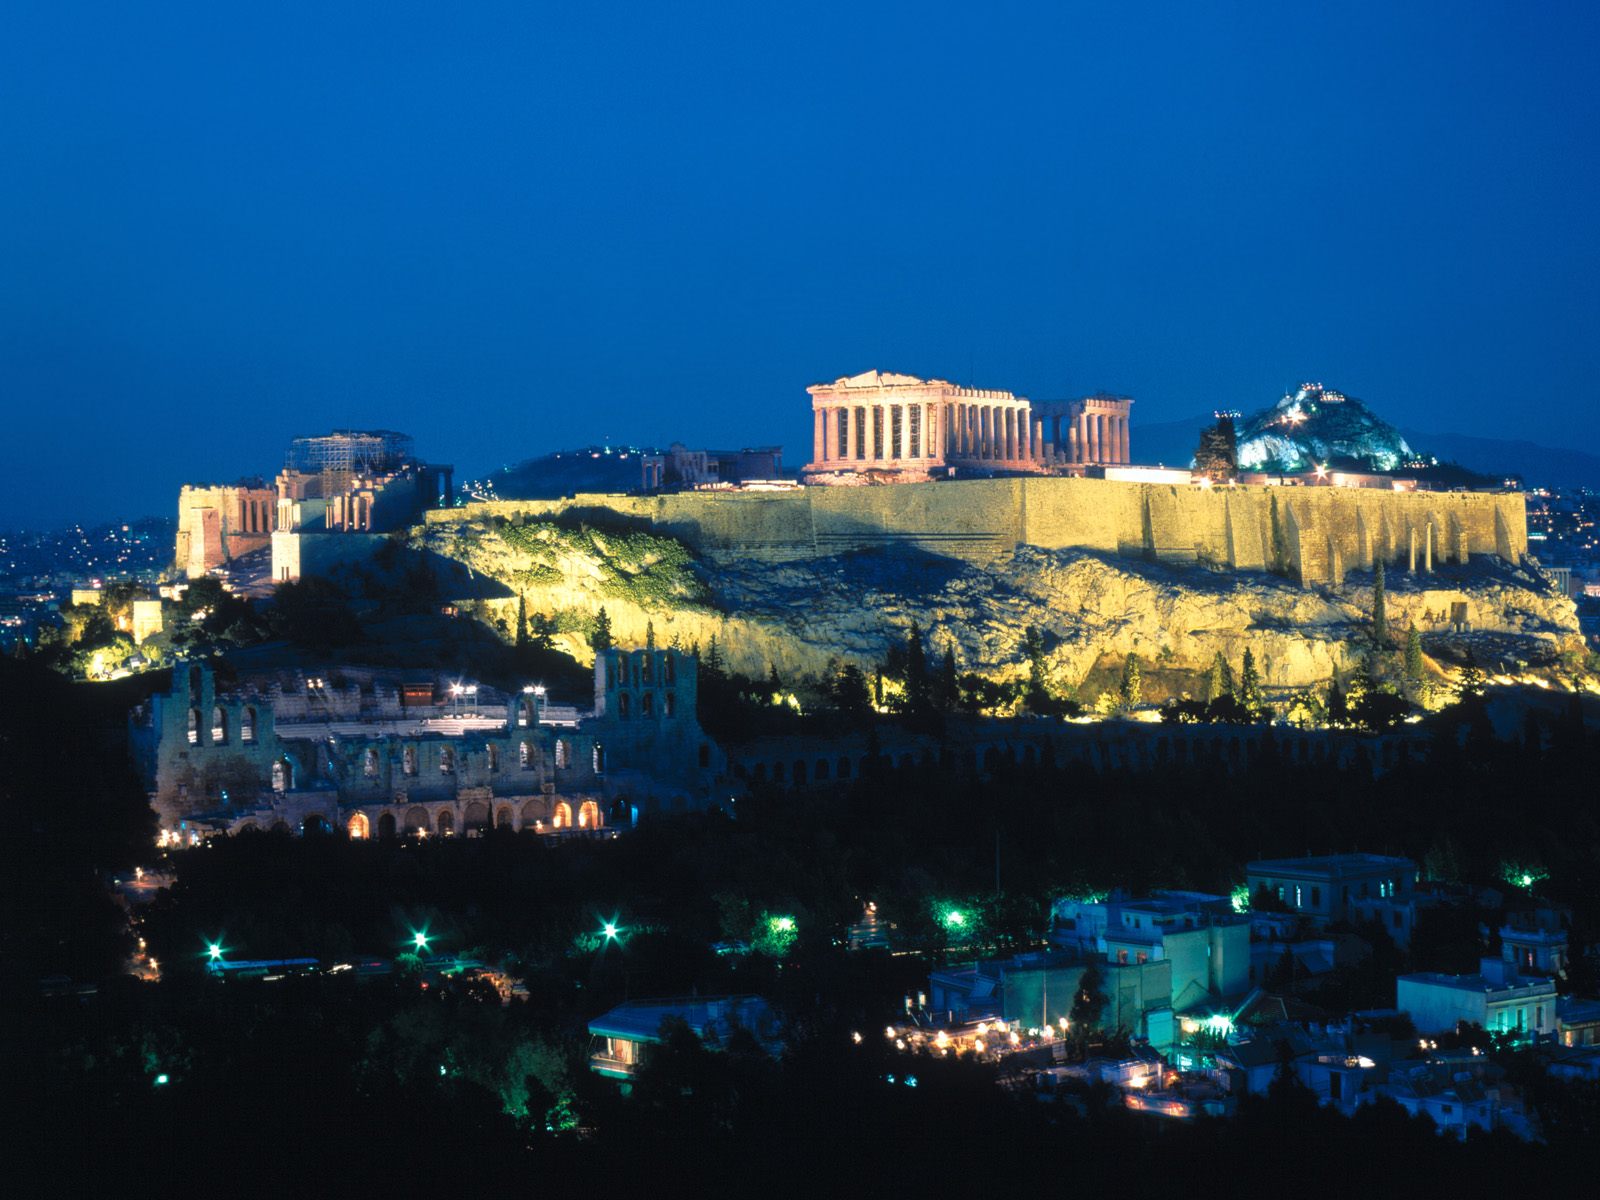 Acropolis Of athens Greece Wallpaper Travel HD Wallpapers